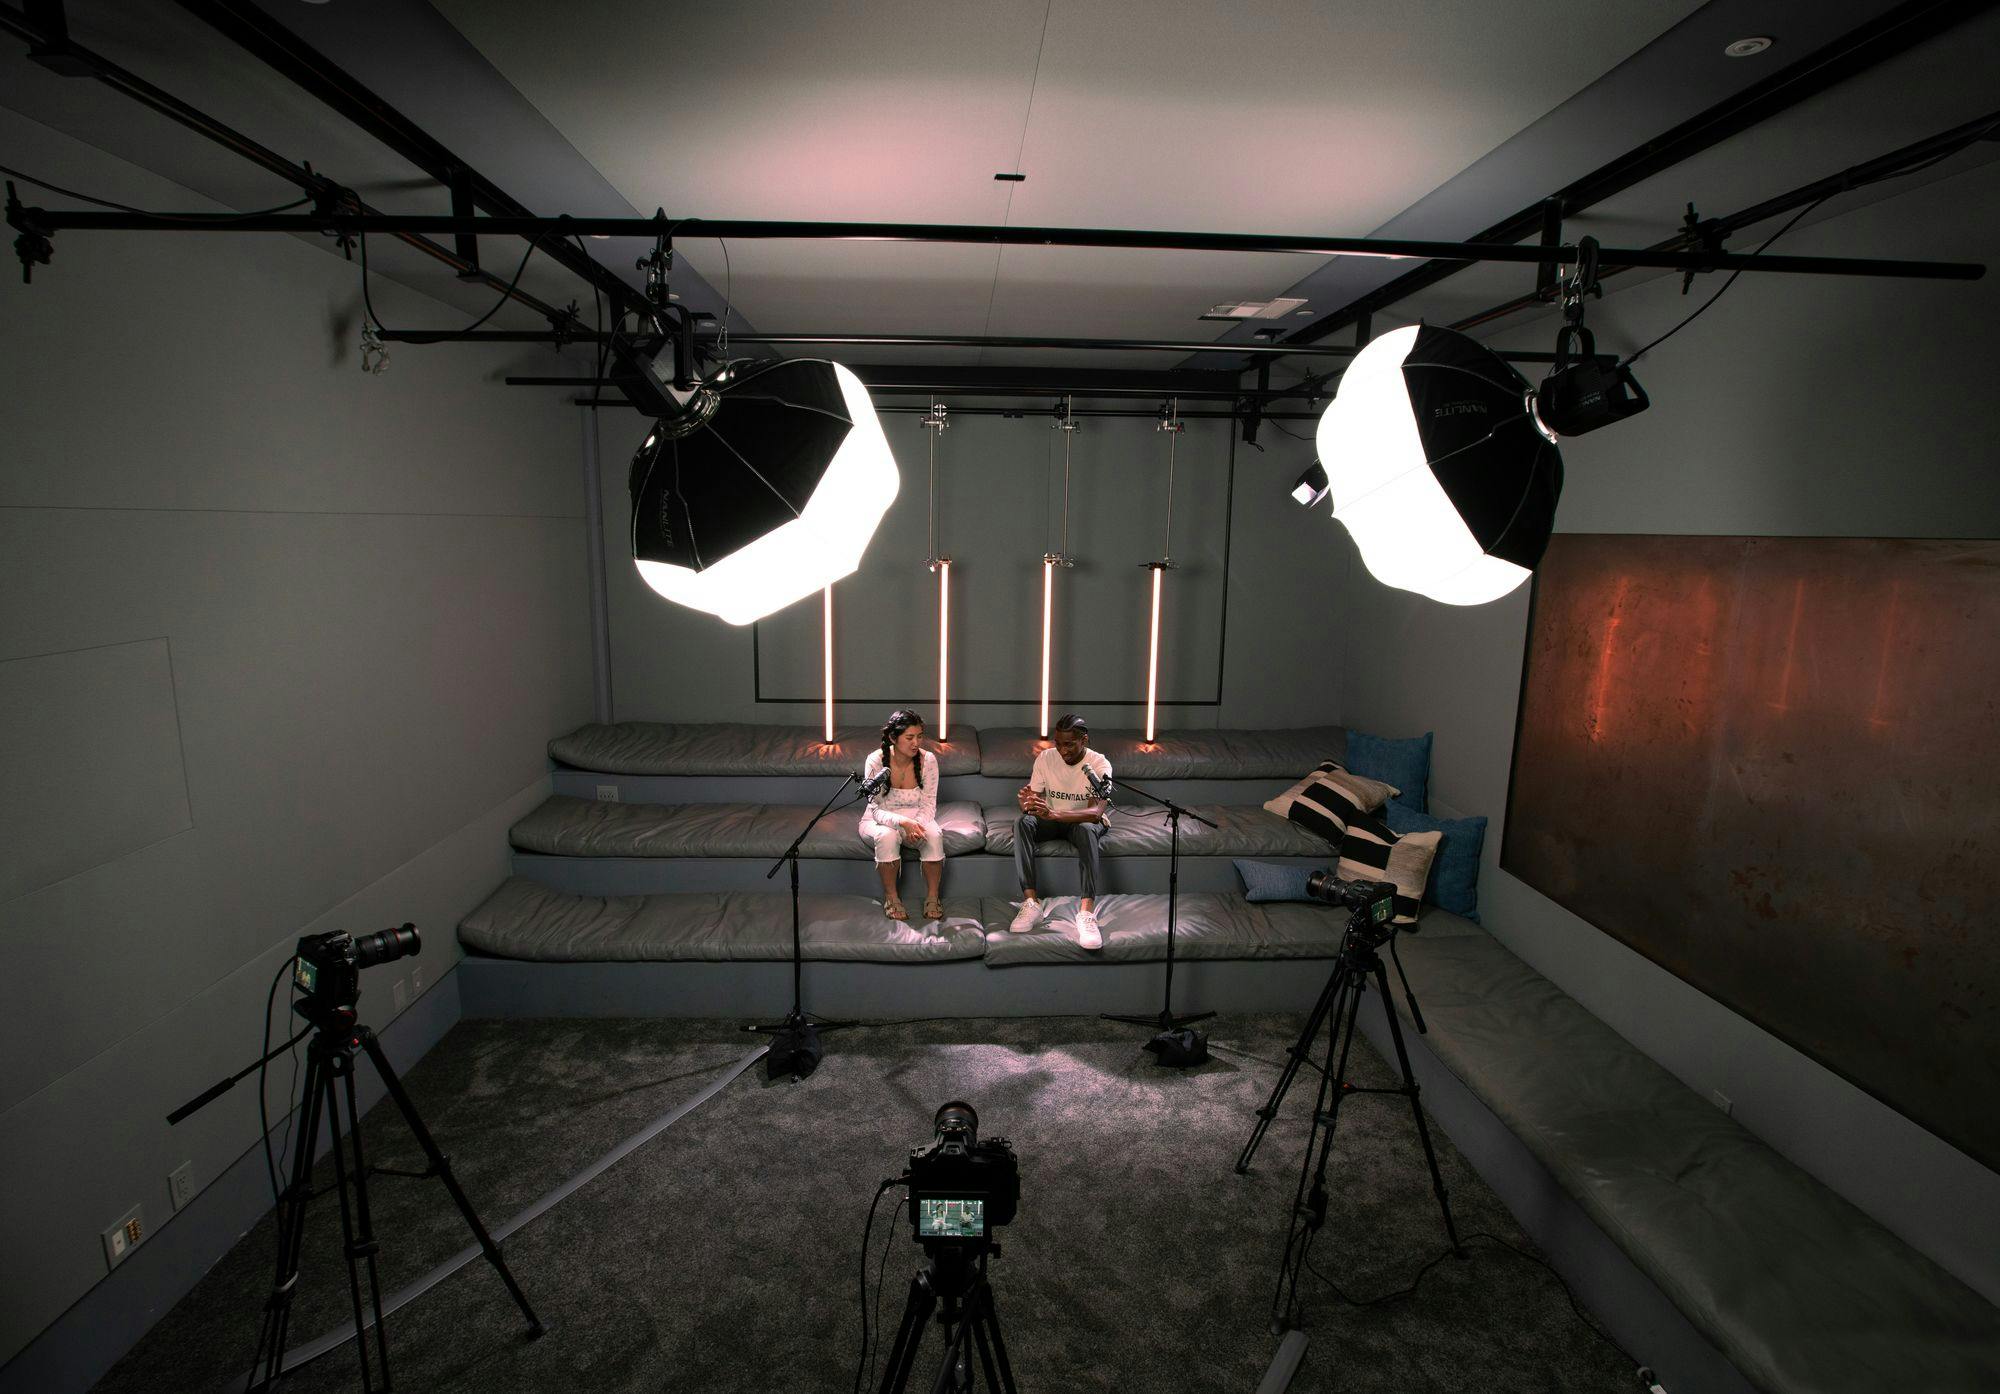 A podcast studio setup with two large softbox lights and a camera on a tripod, focusing on two people sitting on a couch against a backdrop with vertical tube lights.